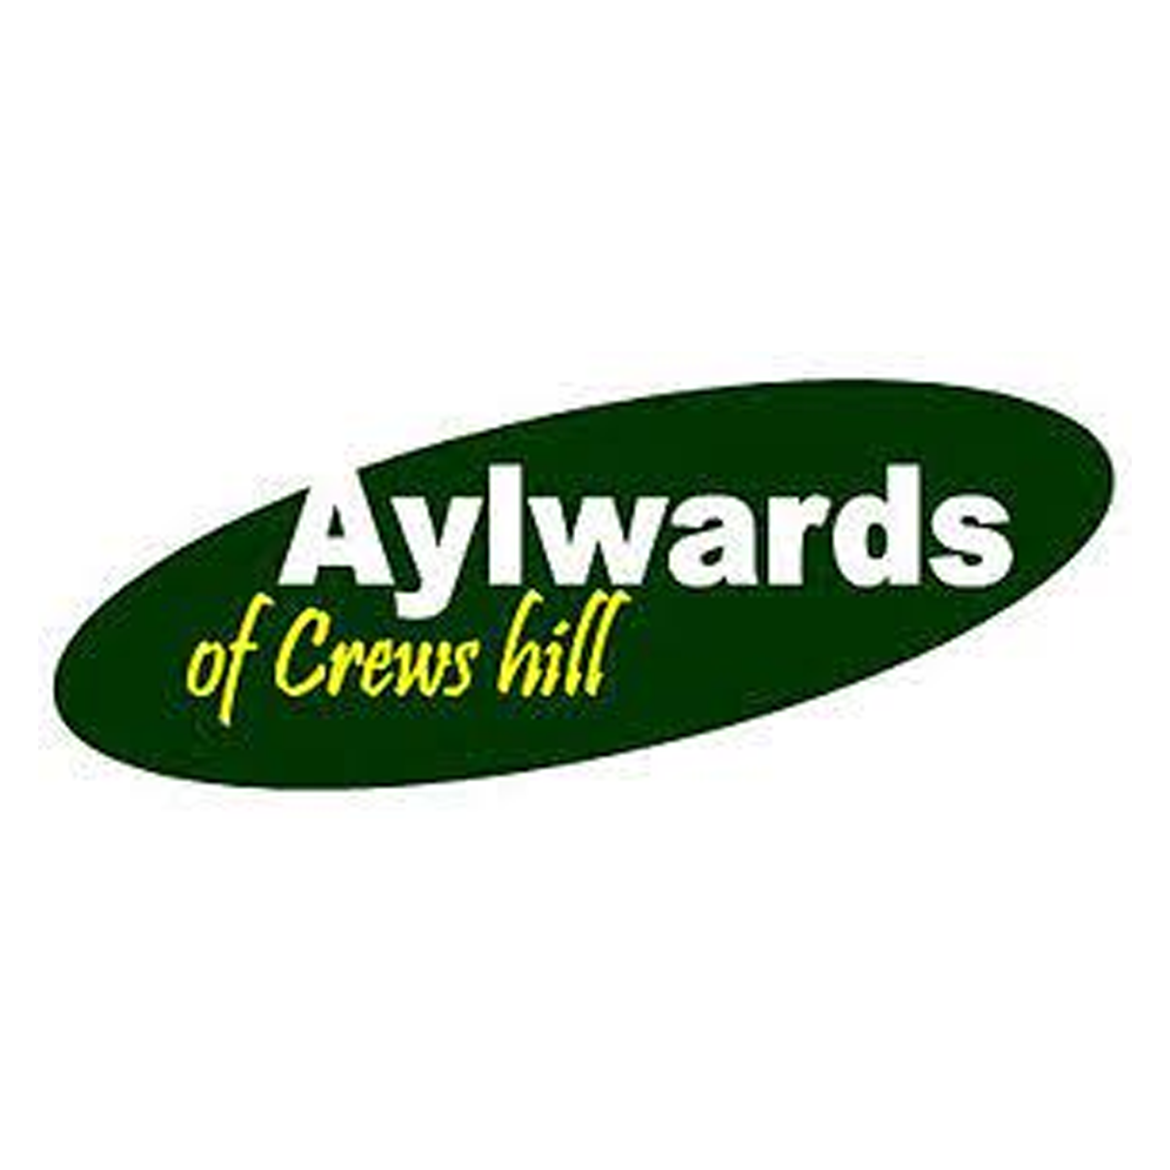 Aylwards-of-crews-hill.png